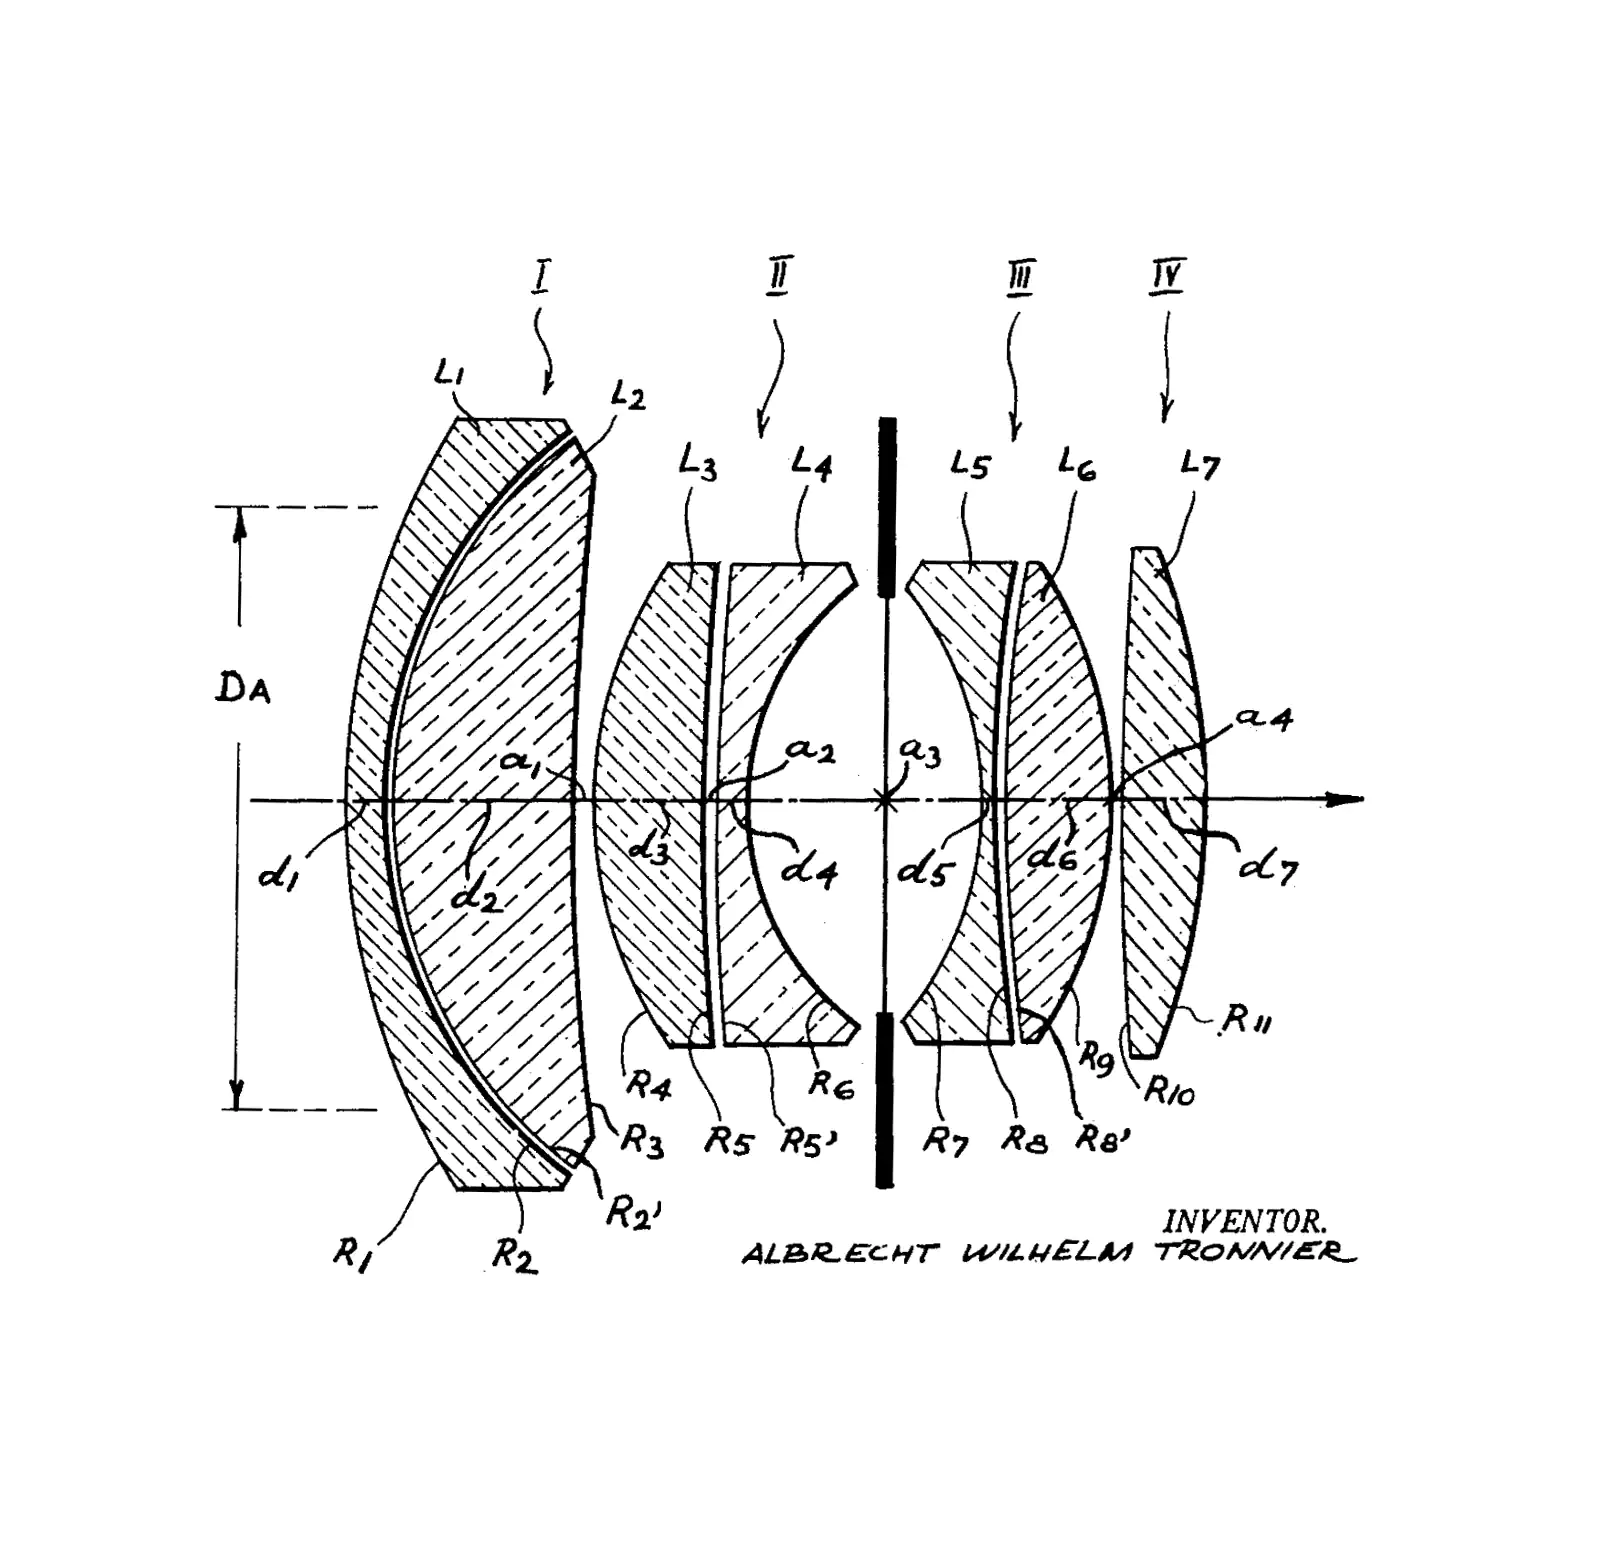 Voigtlander Nokton 50mm f1.5 as drawn by A.W. Tronnier in the US Patent 2,645,155